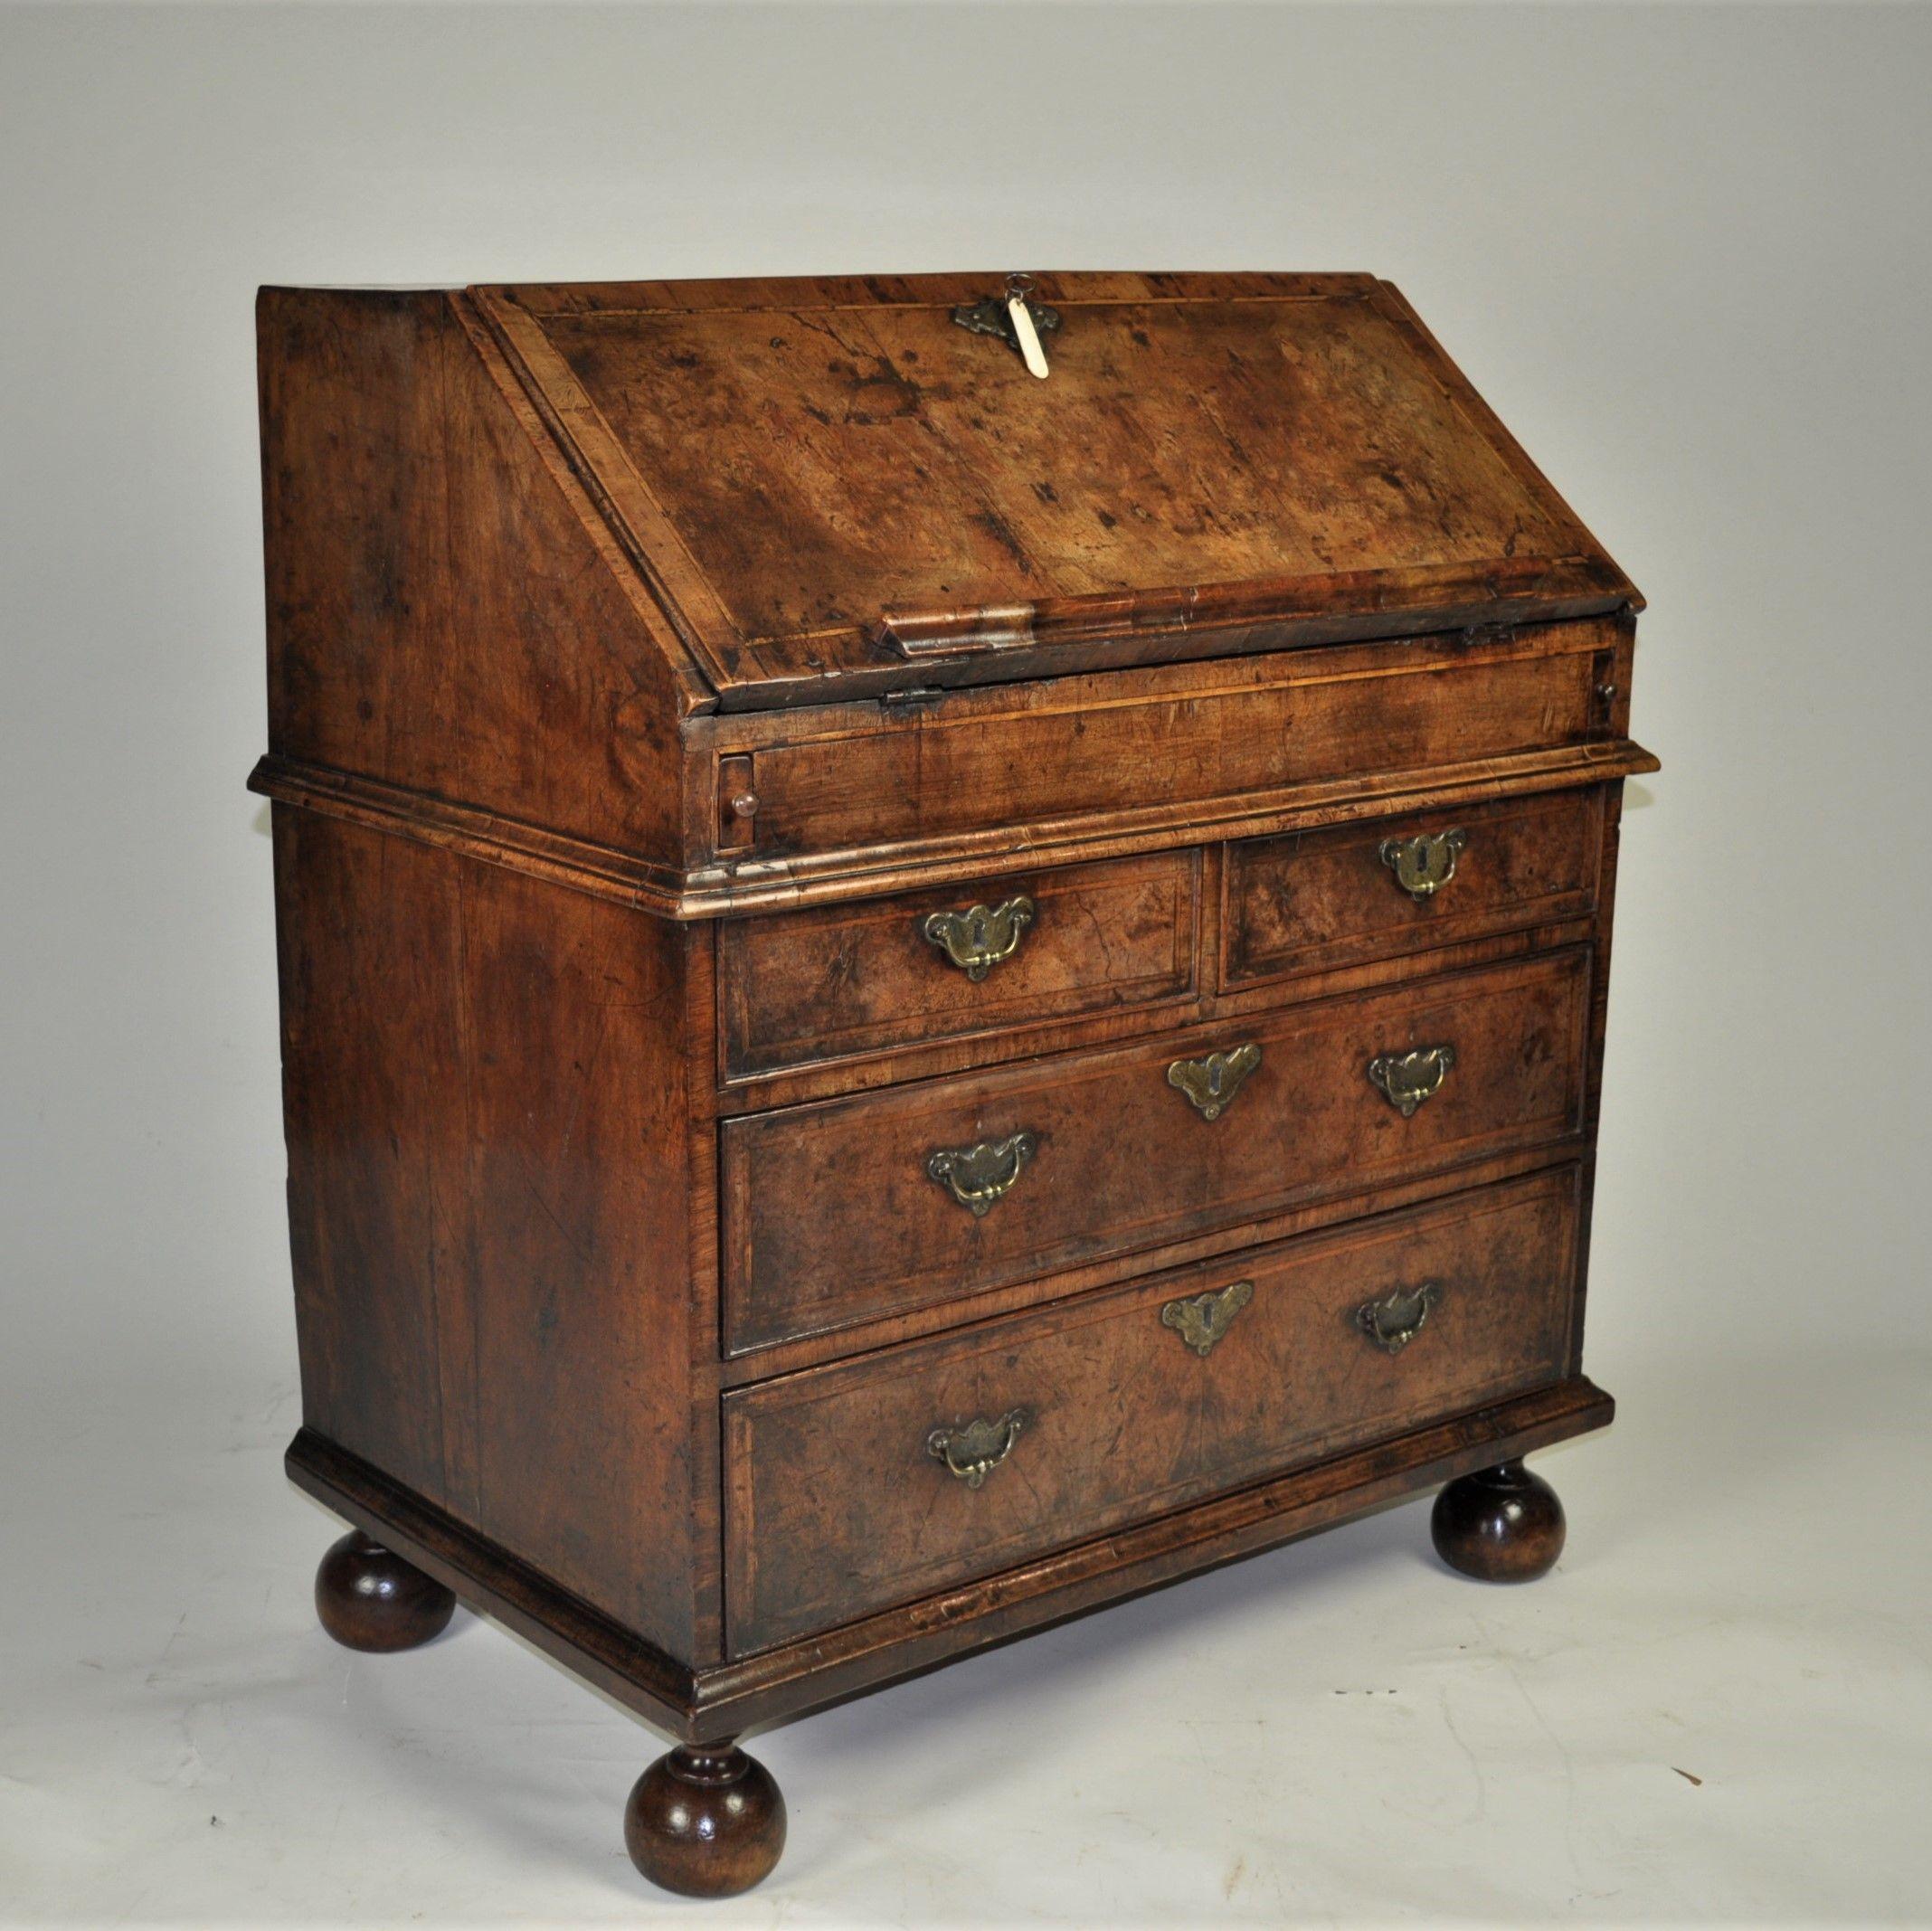 A most enchanting Queen Anne period burr walnut bureau of highly desirable small proportions and superb colour. The herringbone and cross-banded fall enclosing a fully fitted stepped interior with small drawers and central cupboard door all